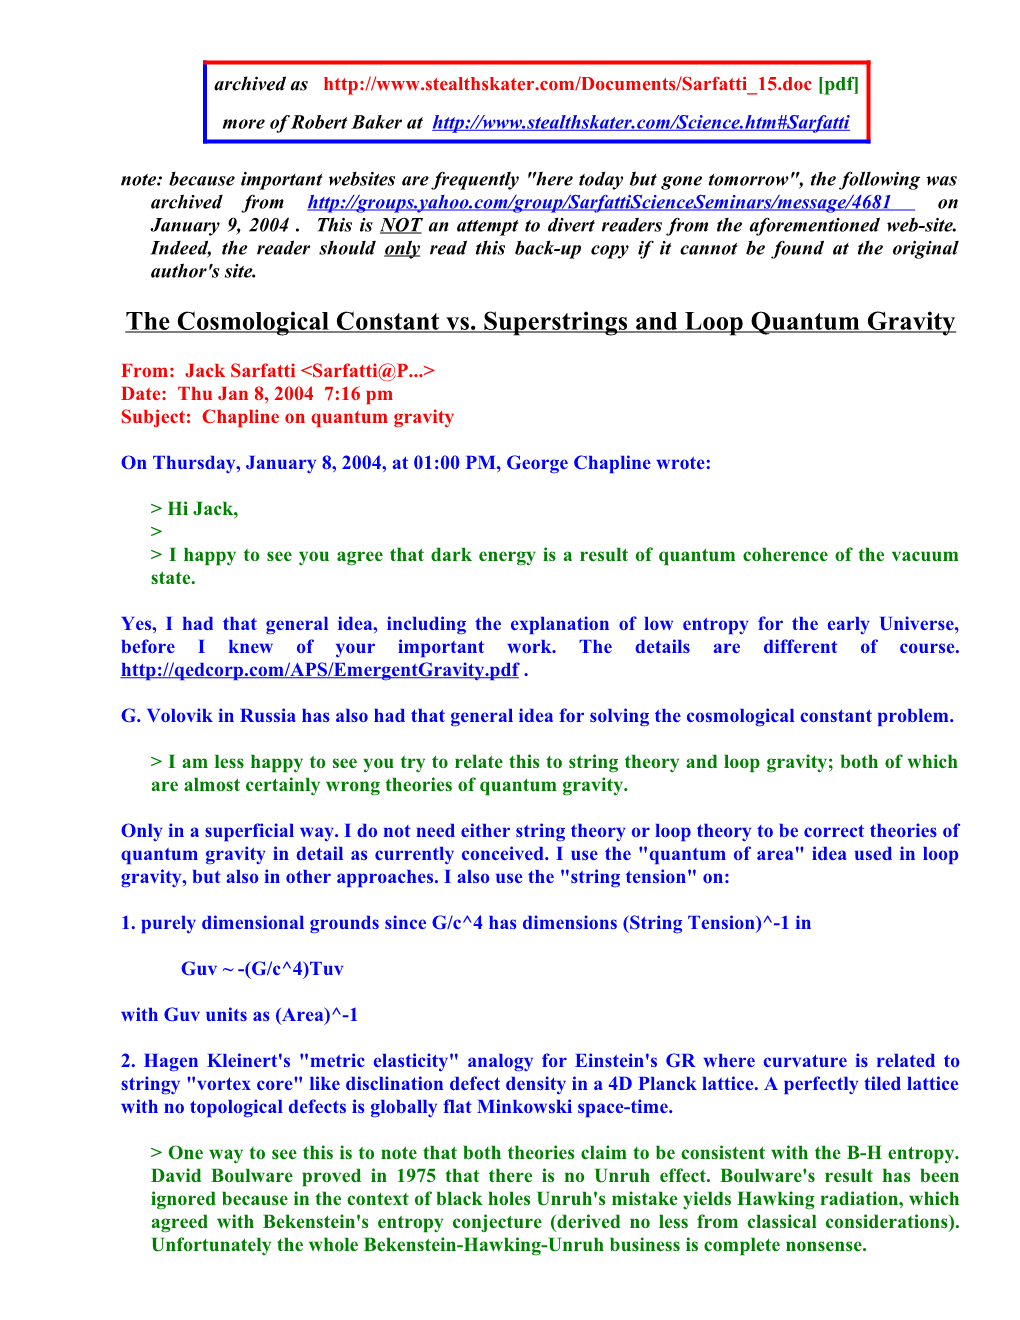 The Cosmological Constant Vs. Superstrings and Loop Quantum Gravity